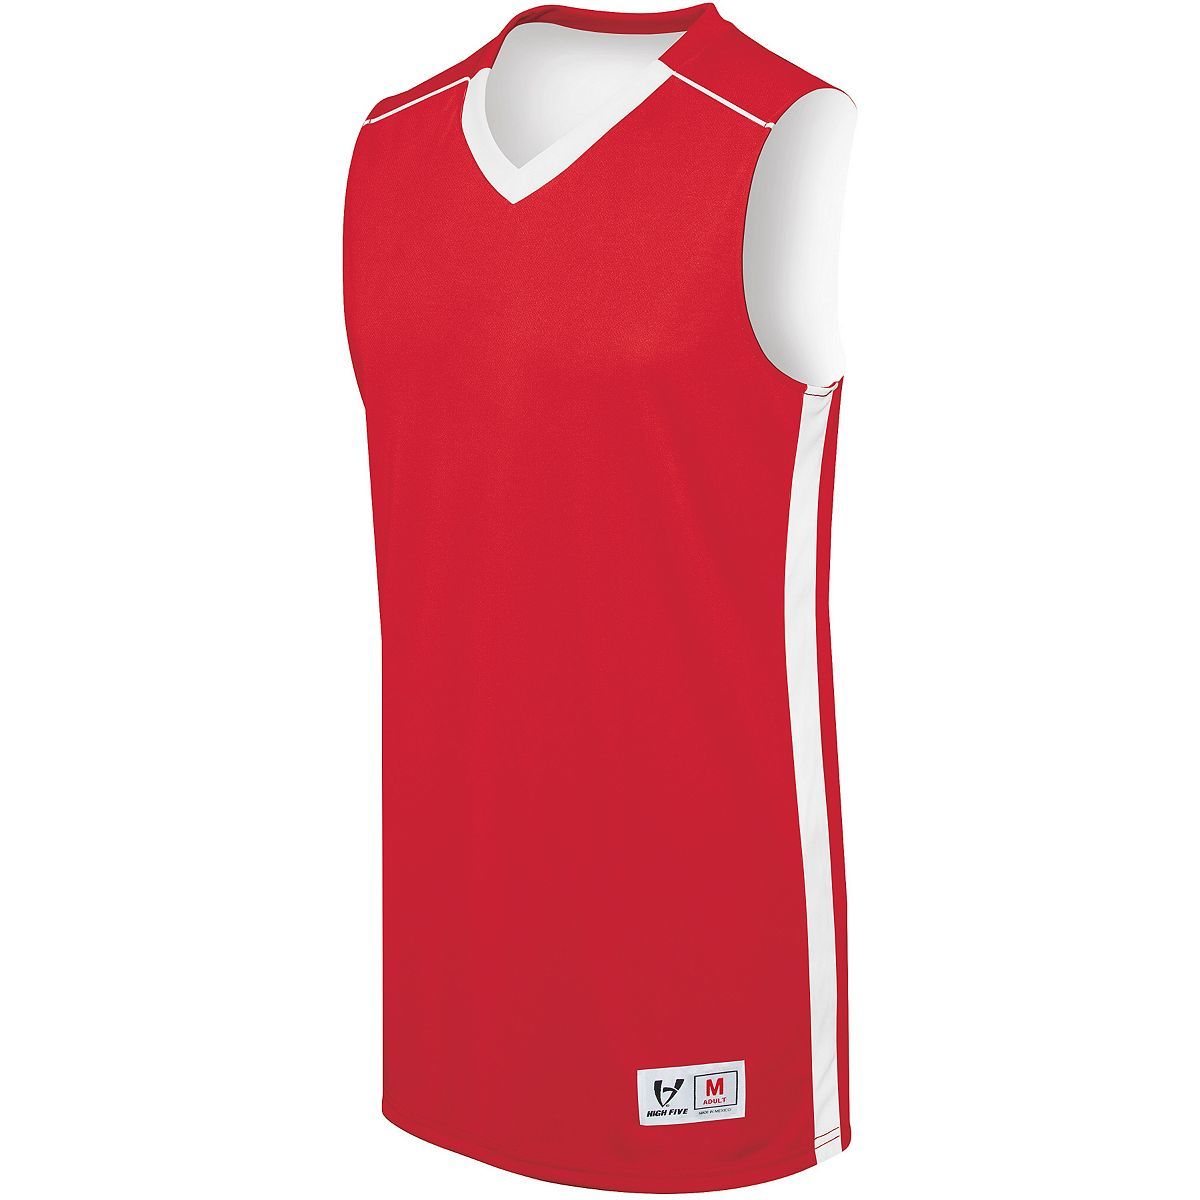 Augusta Sportswear Ladies Competition Reversible Jersey in Scarlet/White  -Part of the Ladies, Ladies-Jersey, Augusta-Products, Basketball, Shirts, All-Sports, All-Sports-1 product lines at KanaleyCreations.com